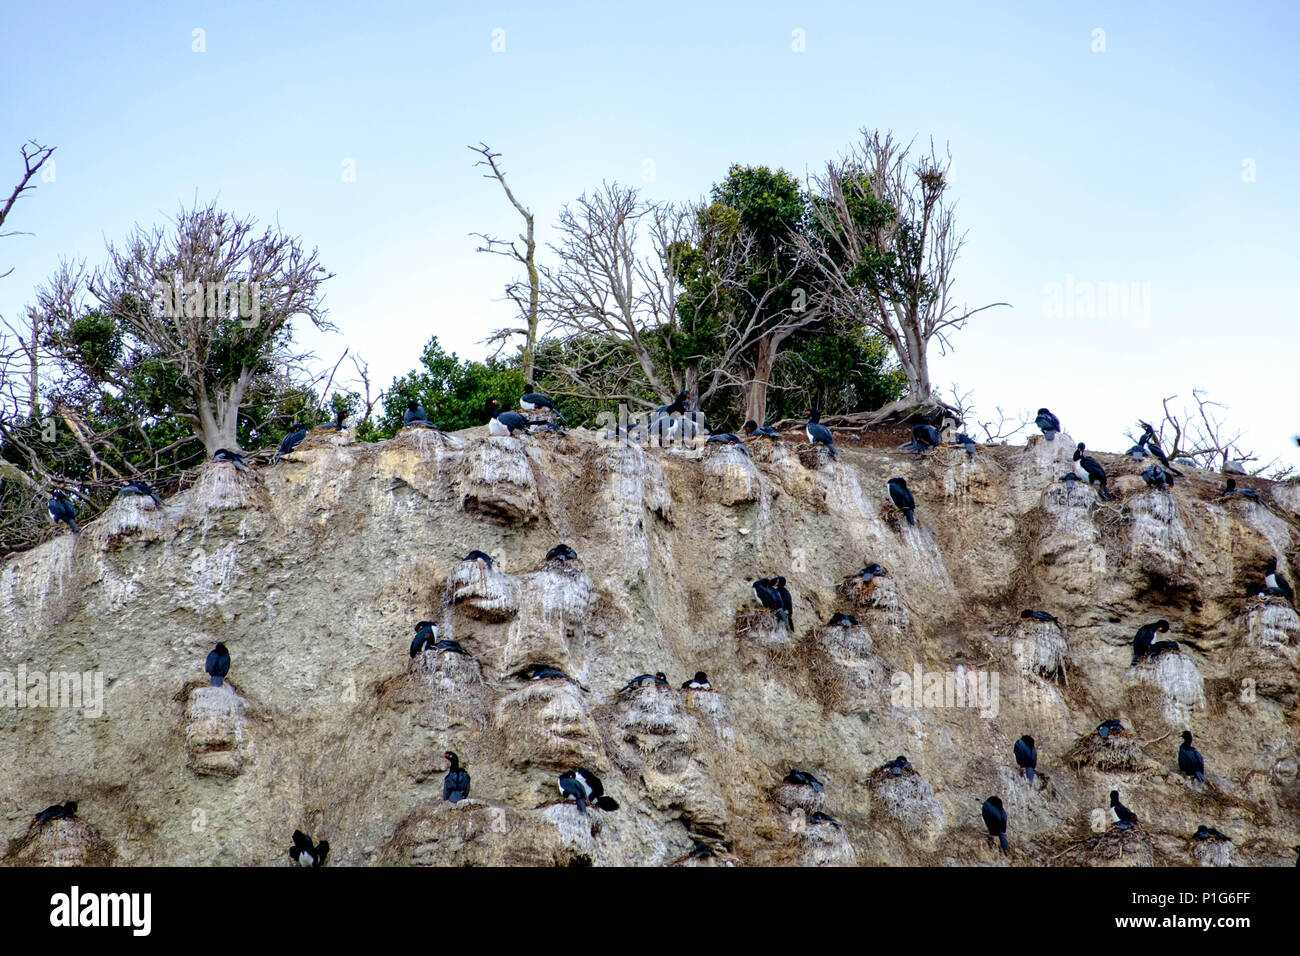 A colony of rock shags nesting on a cliff on an island in the Beagle Channel near Ushuaia, Argentina. Stock Photo